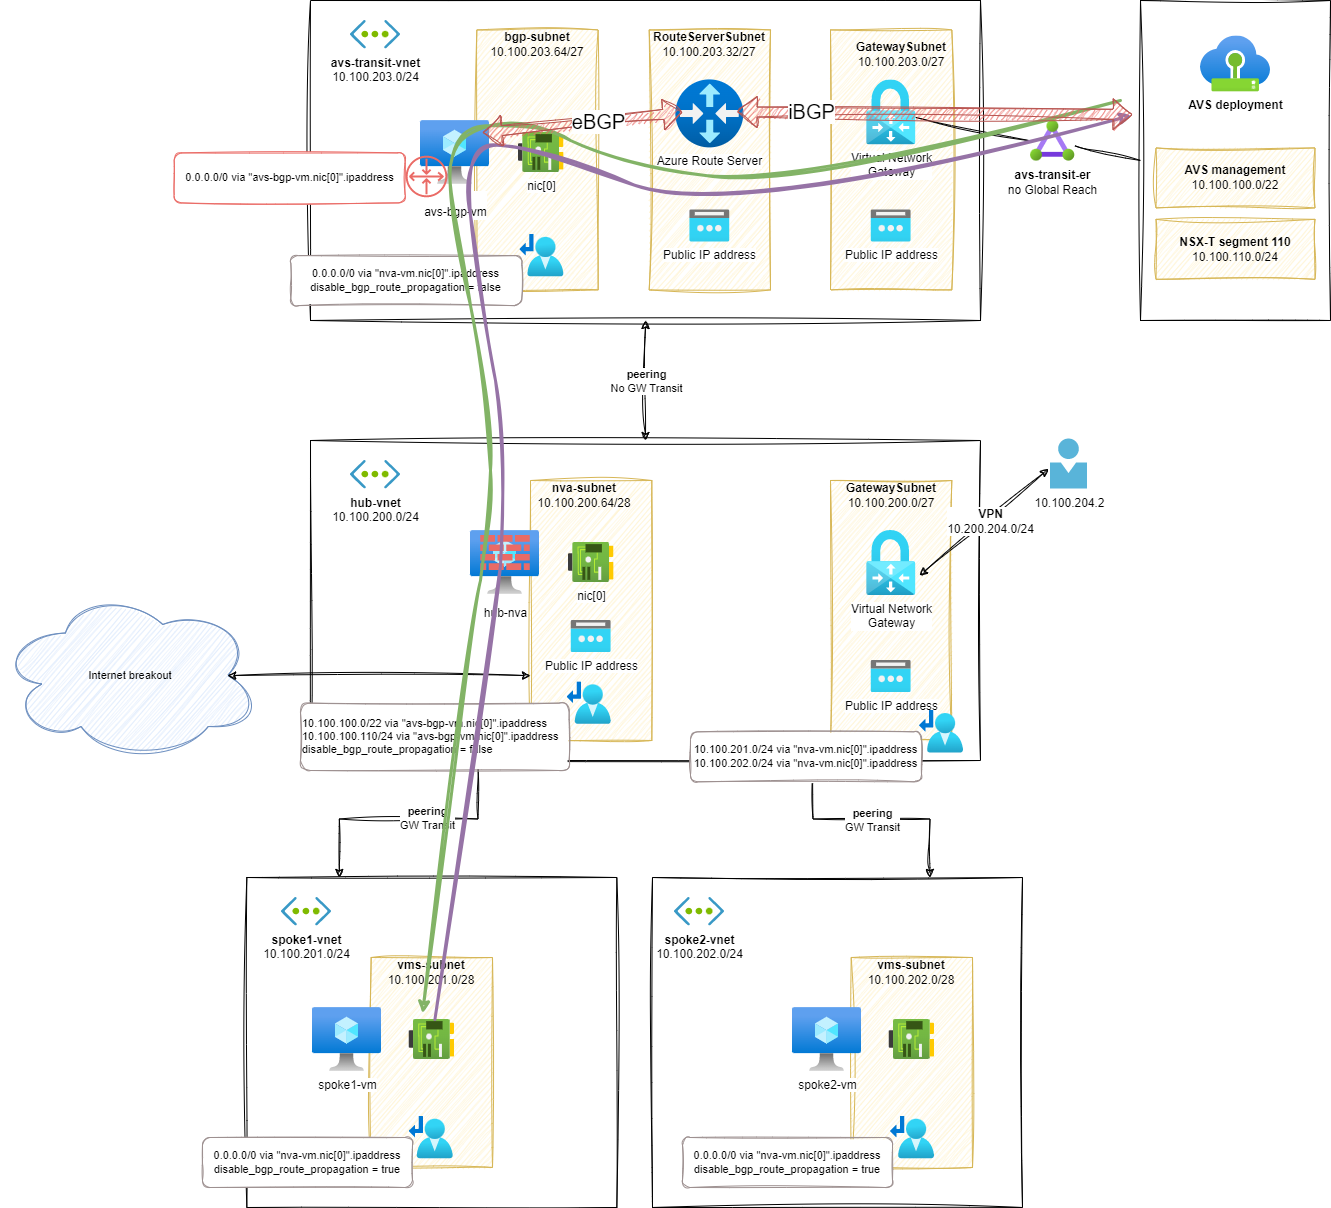 Overview of network flows between a spoke VM and an AVS based VM